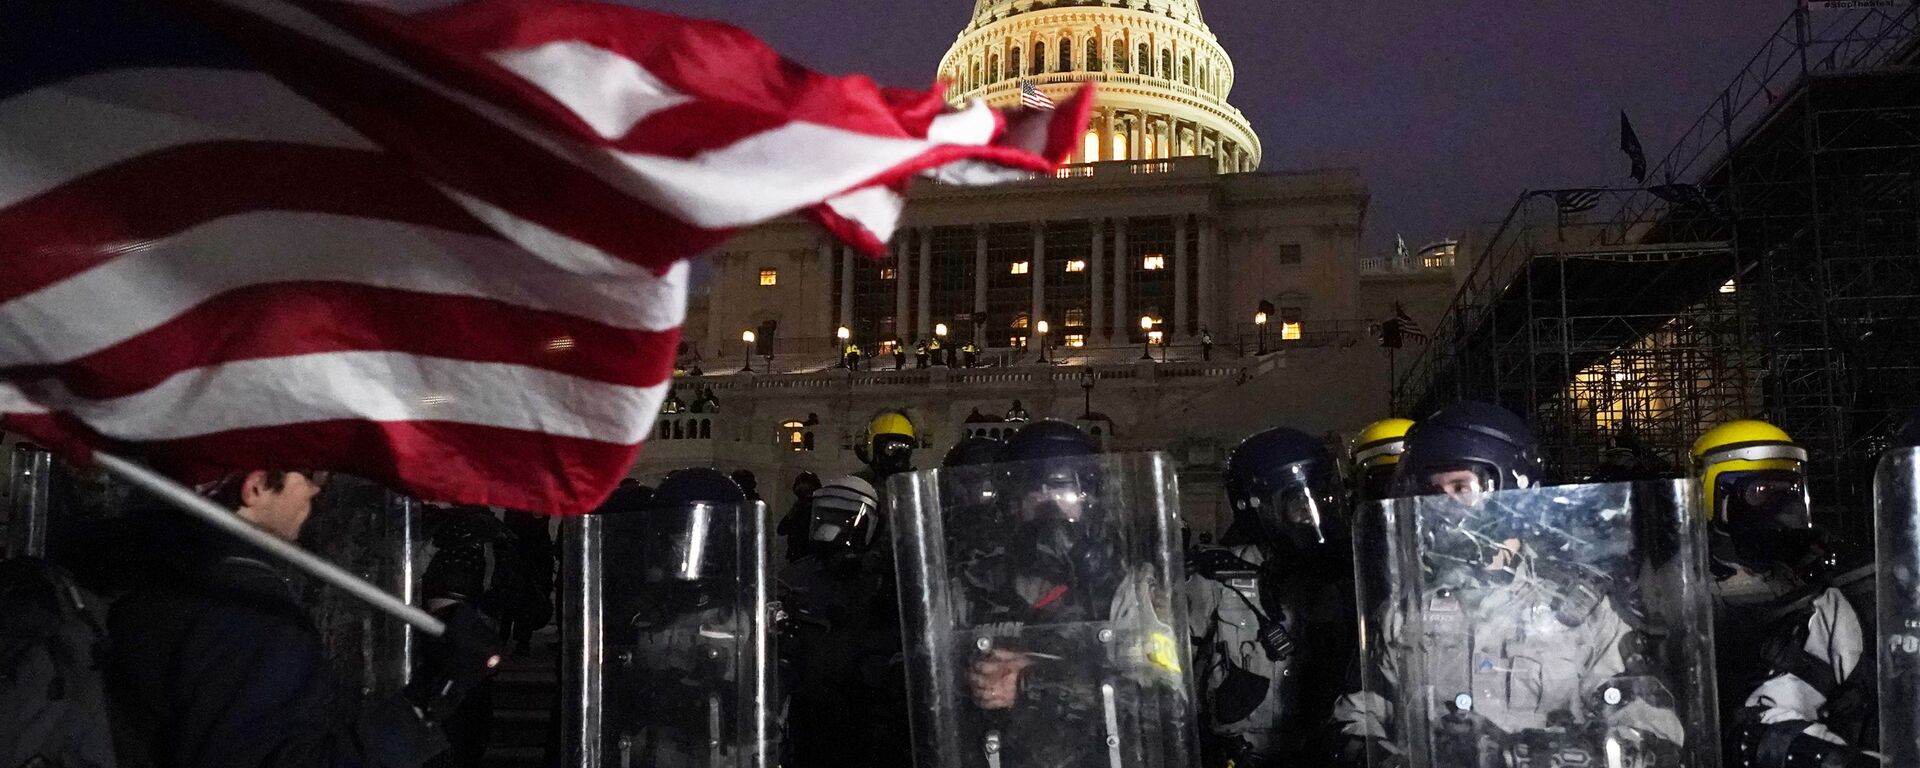 Police stand guard after a day of riots at the U.S. Capitol in Washington on Wednesday, Jan. 6, 2021 - Sputnik International, 1920, 28.10.2021